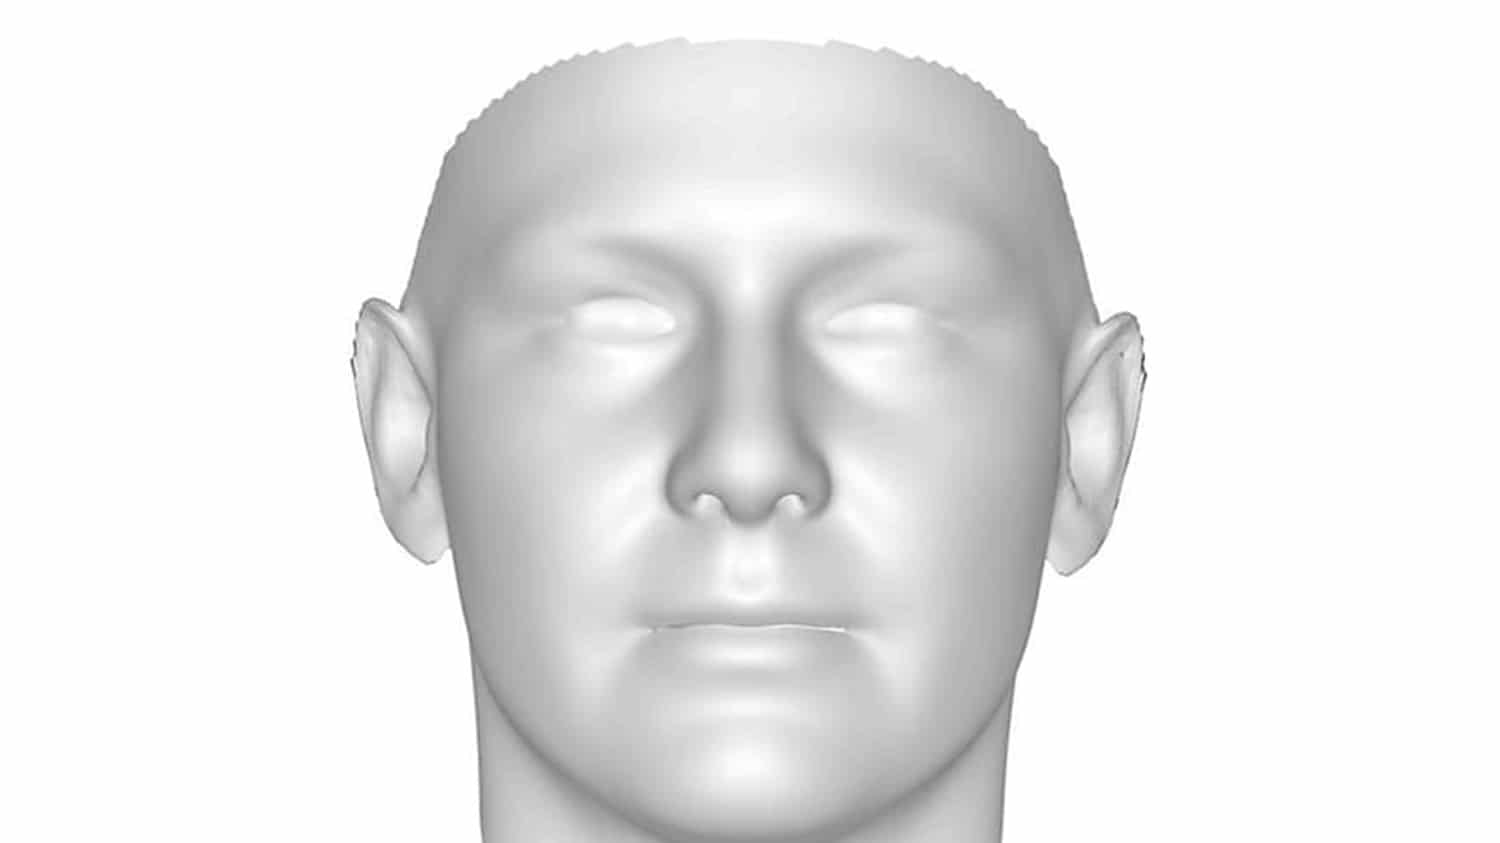 3D face scans were produced for participants before analysis